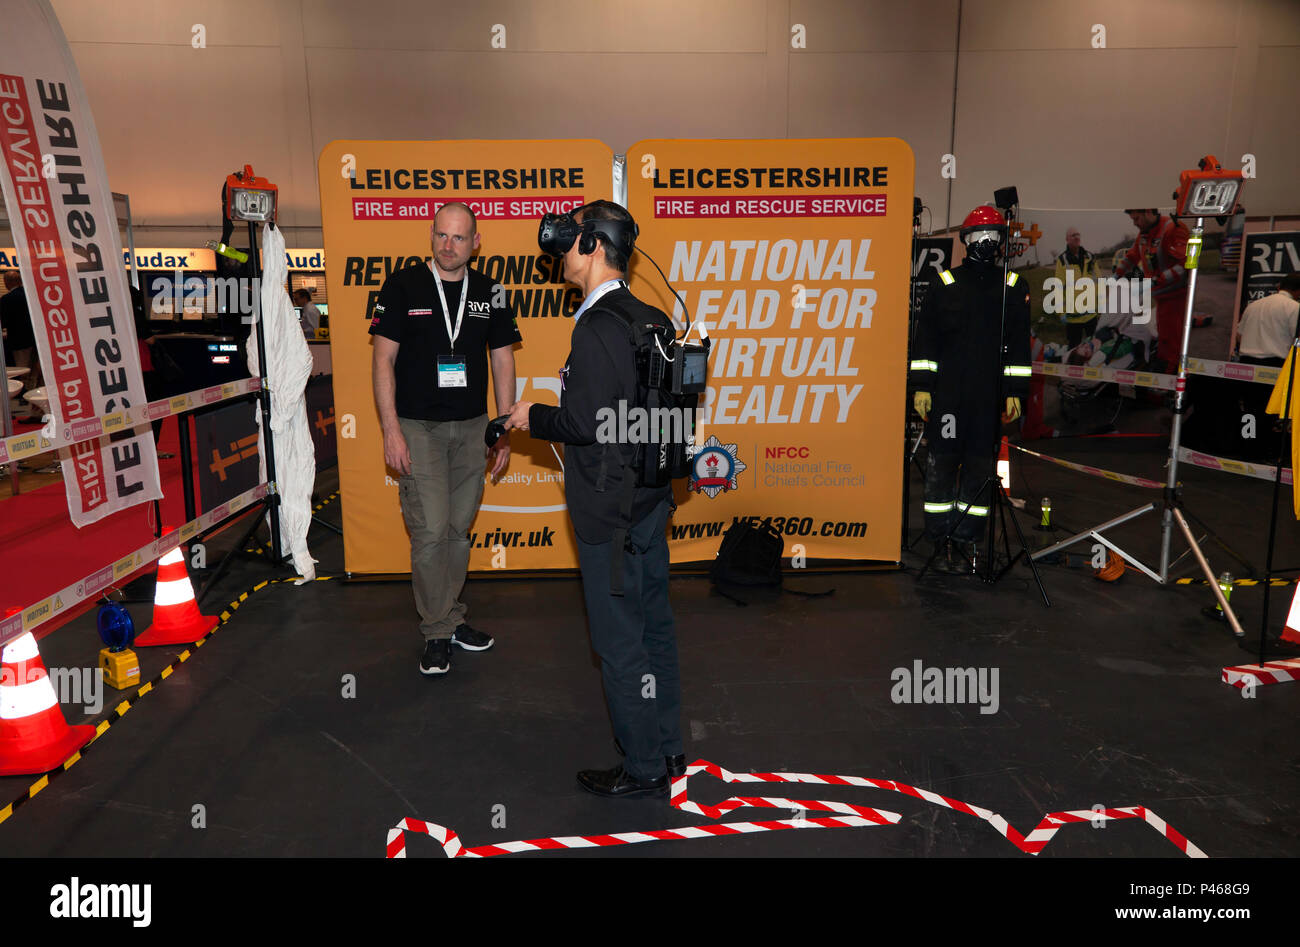 Leicestershire Fire and Rescue Services demonstrating the use of VR as a training aid in the Fire service, at TechXLR8 2018, ExCel, London Stock Photo